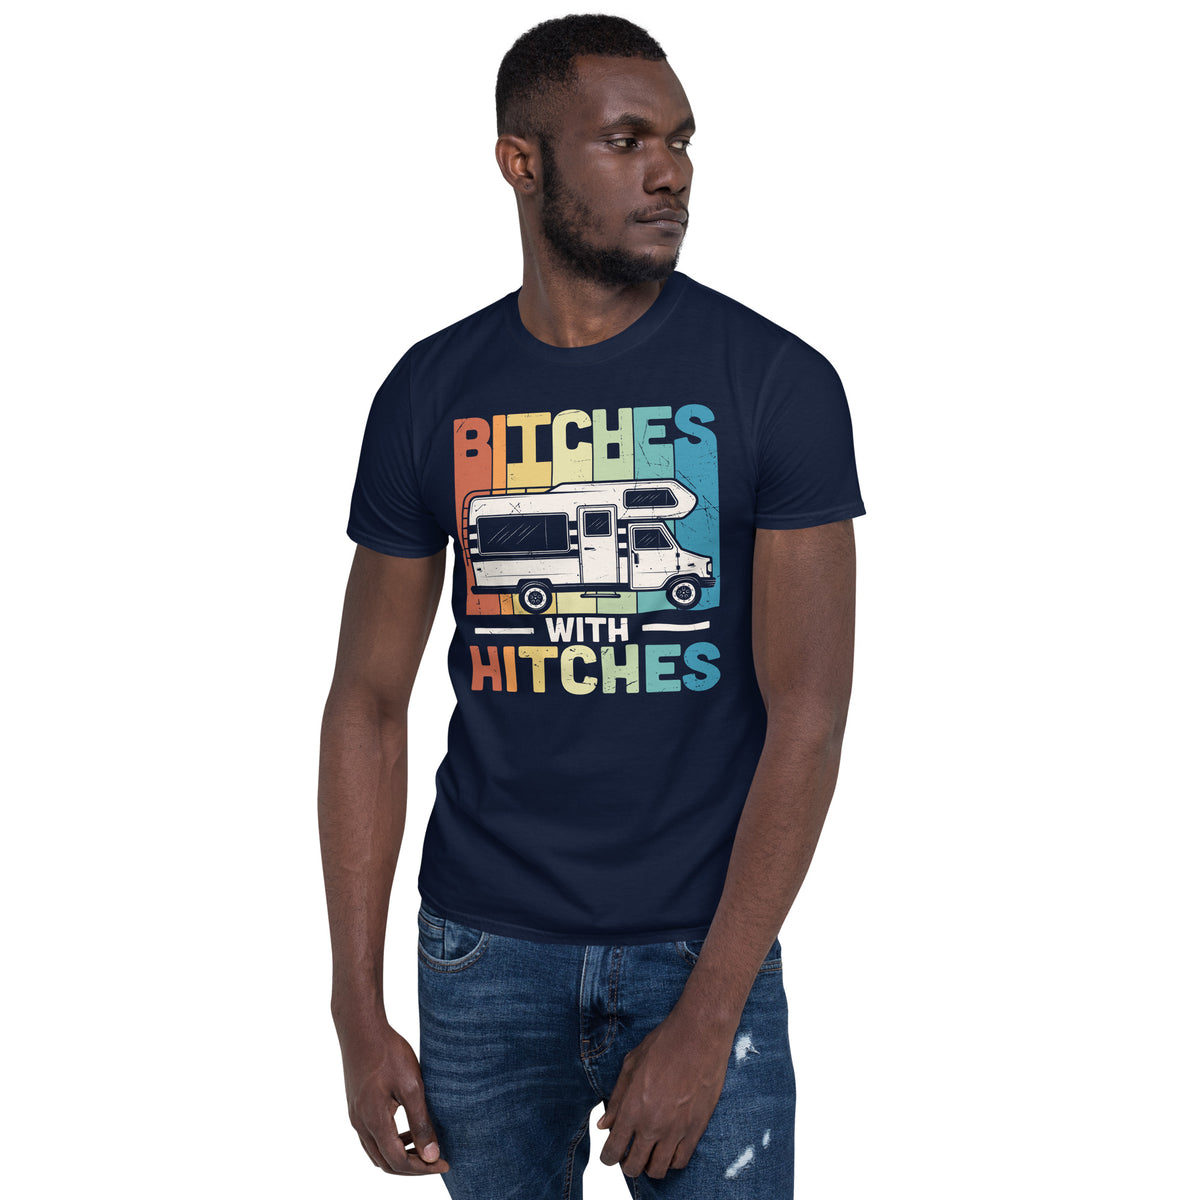 Cooles Herren Spruch Shirt "Bitches with Hitches"